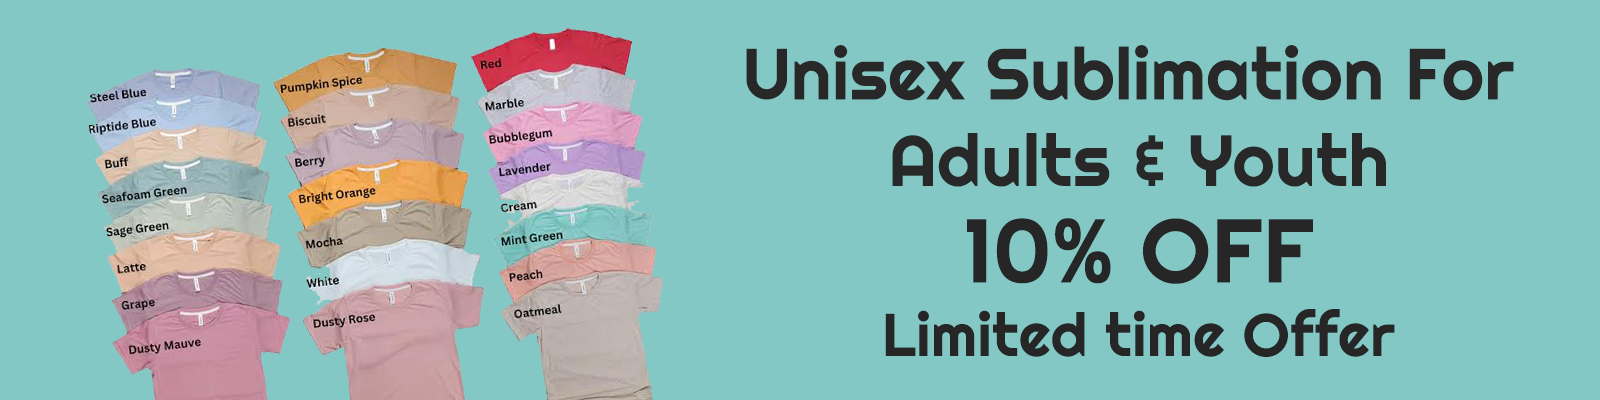 Unisex Sublimation for Adults & Youth